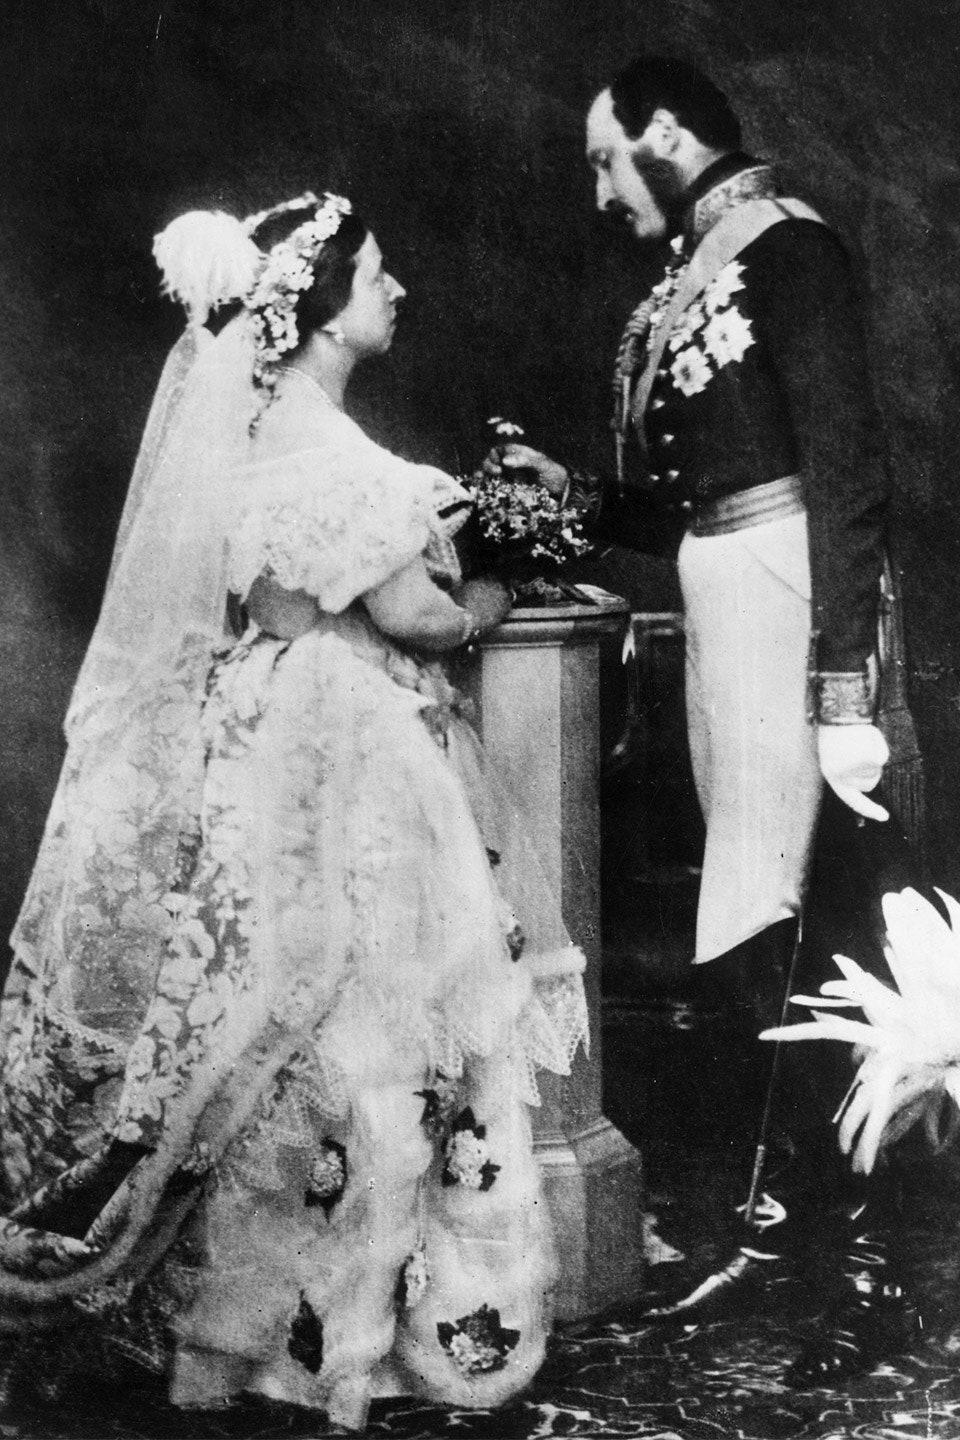 Black and White photograph of Albert and Victoria. Victoria is covered in lace from head to toe. Albert is wearing formal military dress.